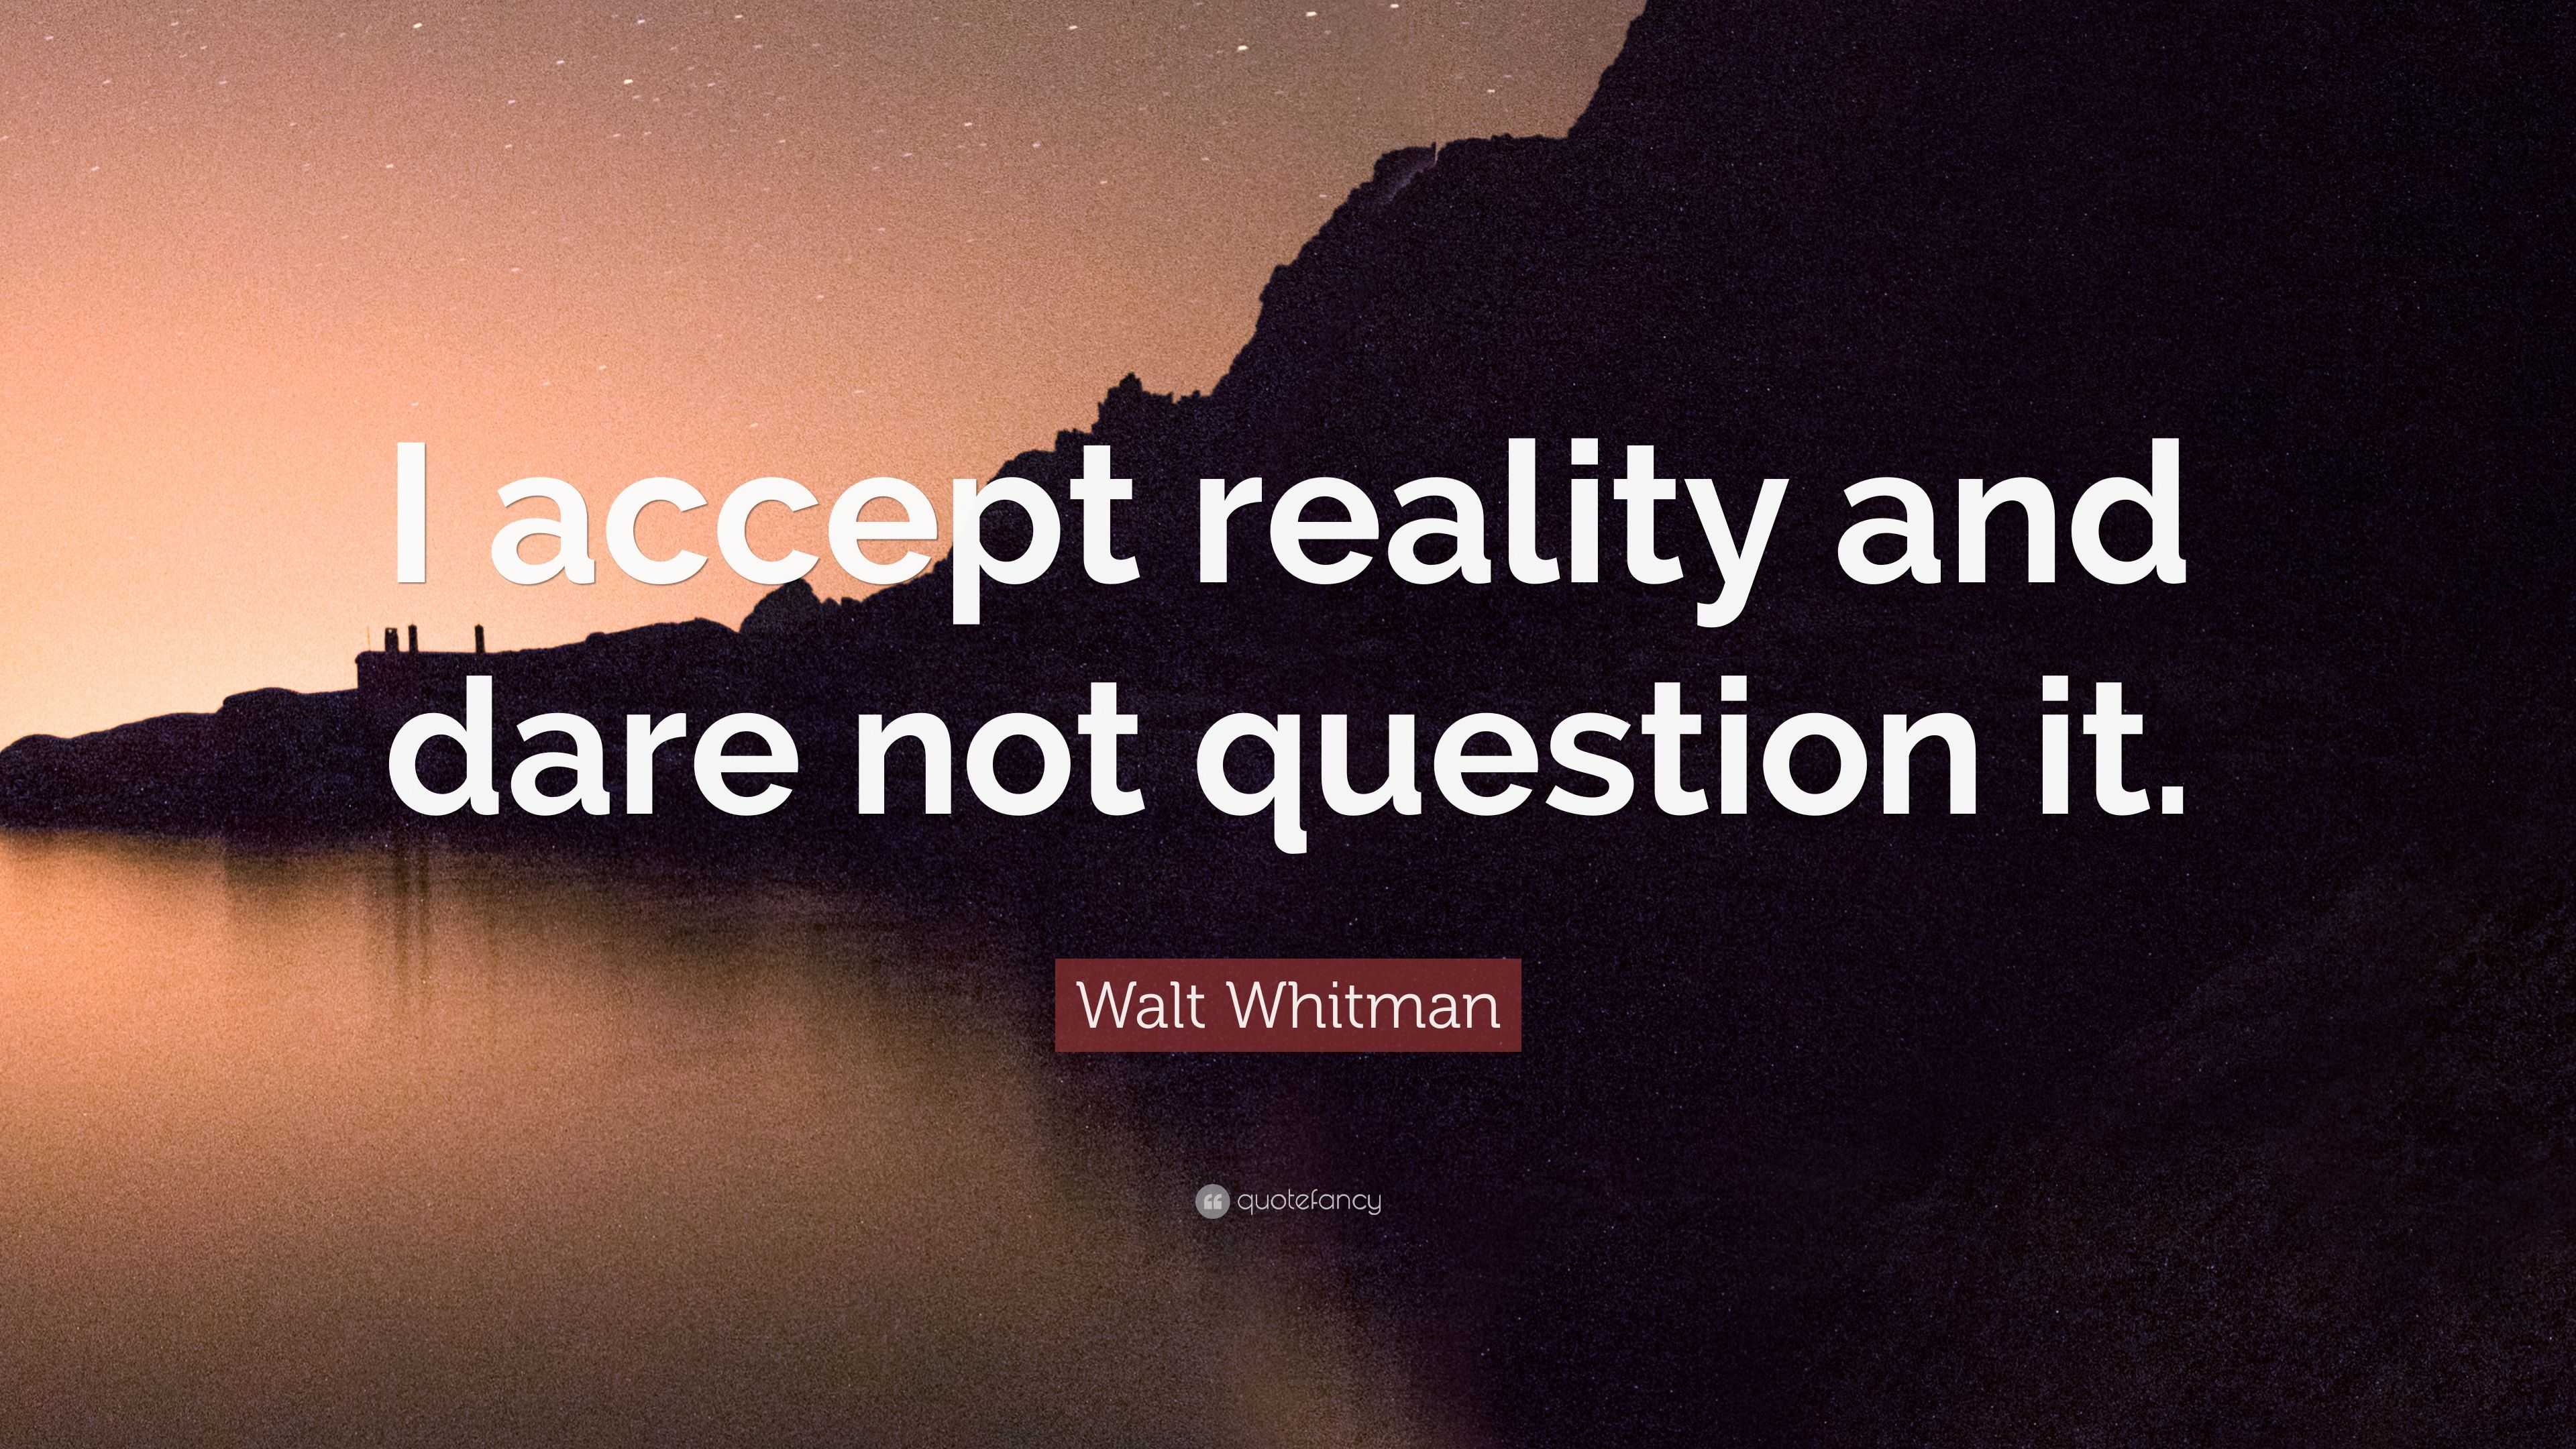 Walt Whitman Quote: “I accept reality and dare not question it.” (10 ...